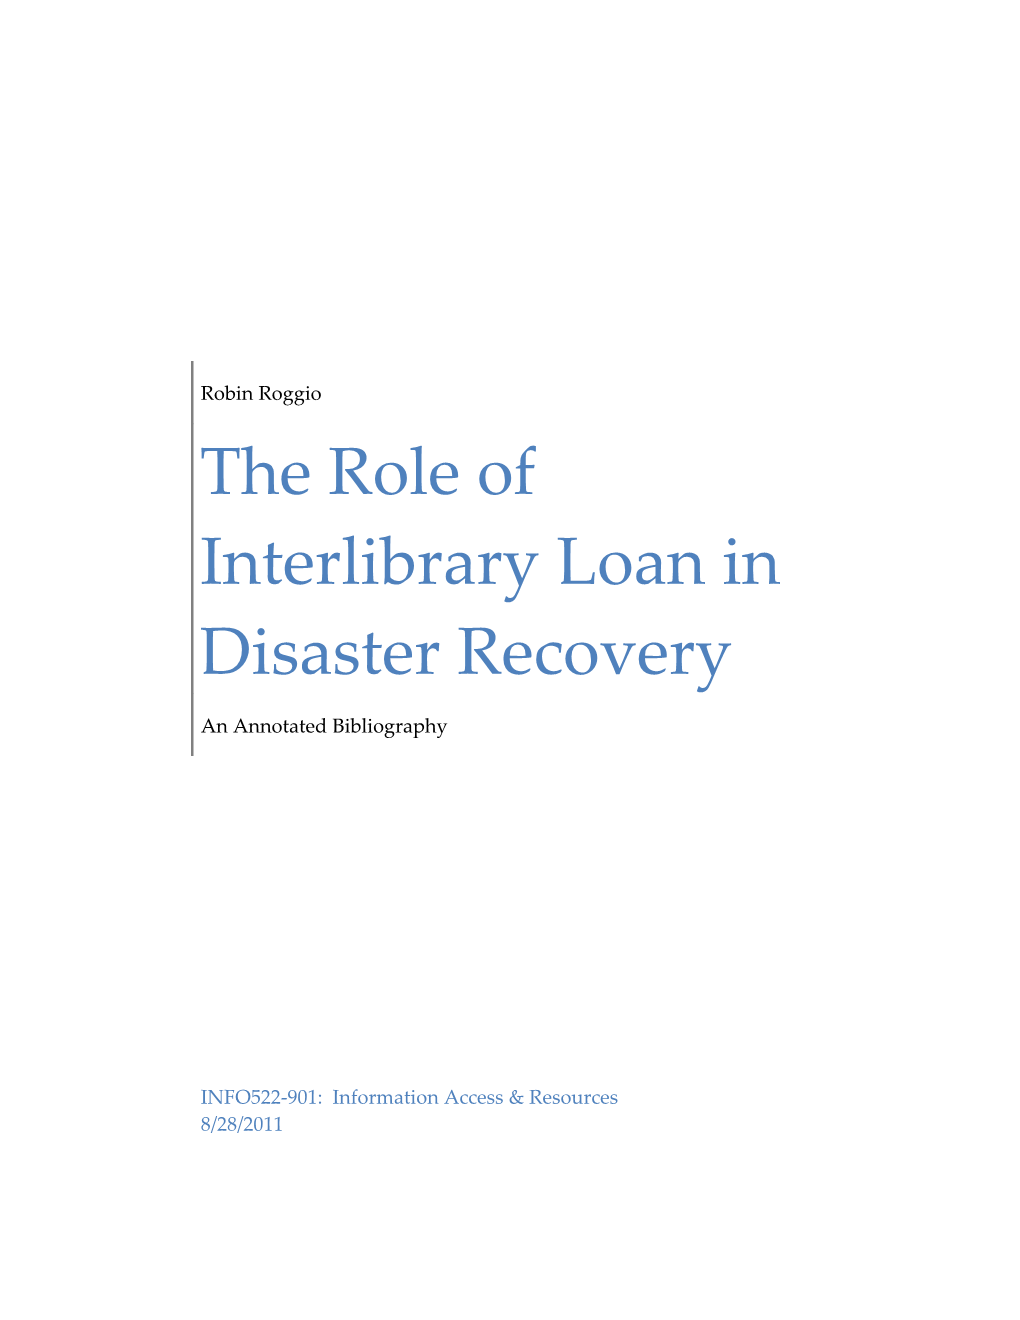 The Role of Interlibrary Loan in Disaster Recovery